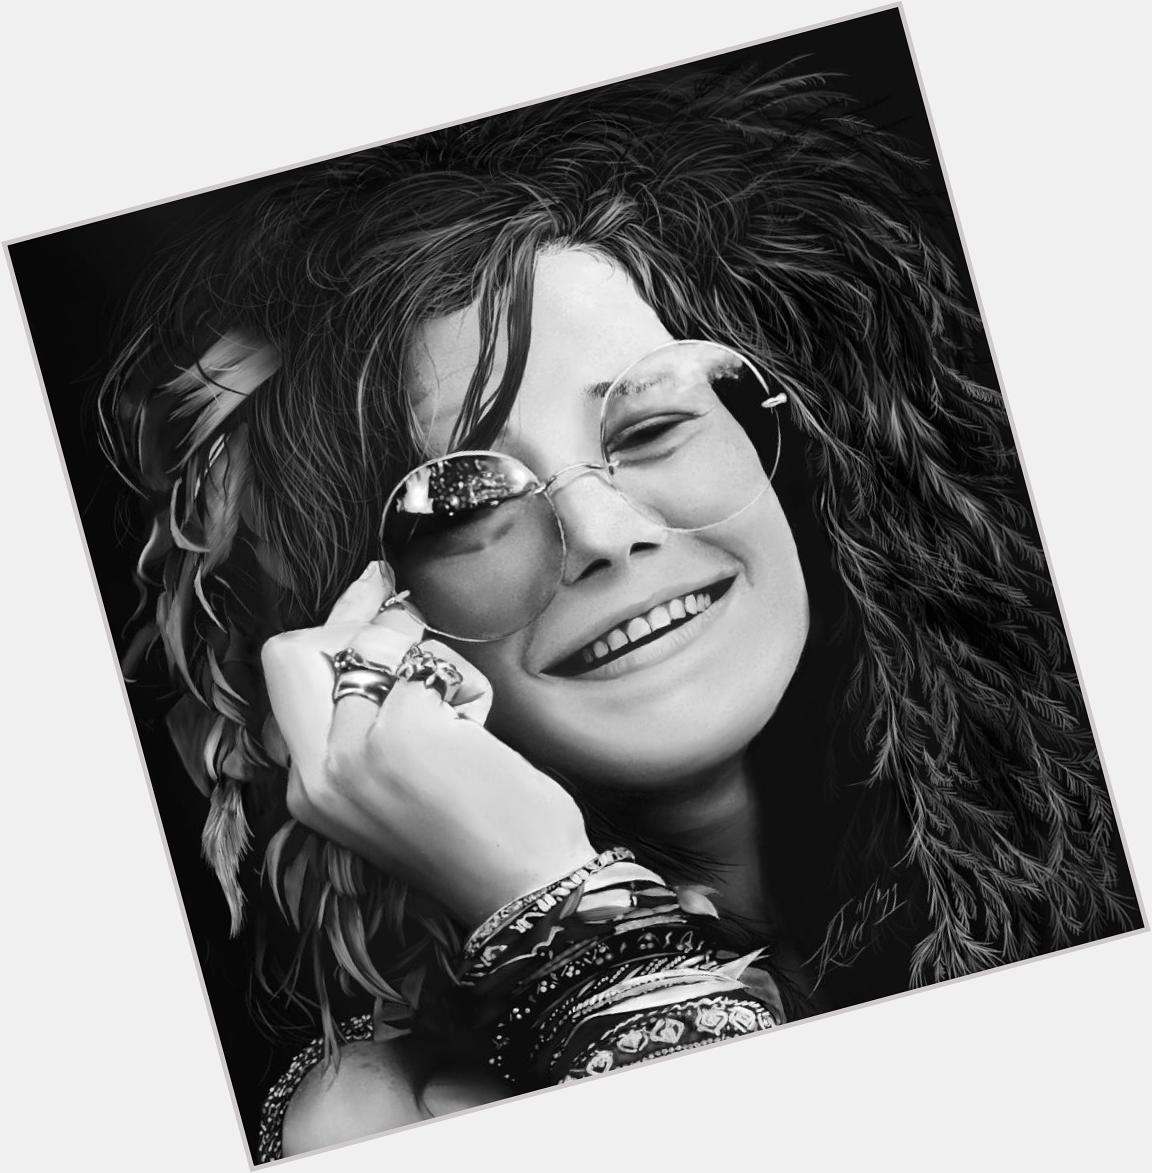   Born on this day in 1943, 60s star Janis Joplin  You mean legend? 60s Legend. Happy Birthday girl,